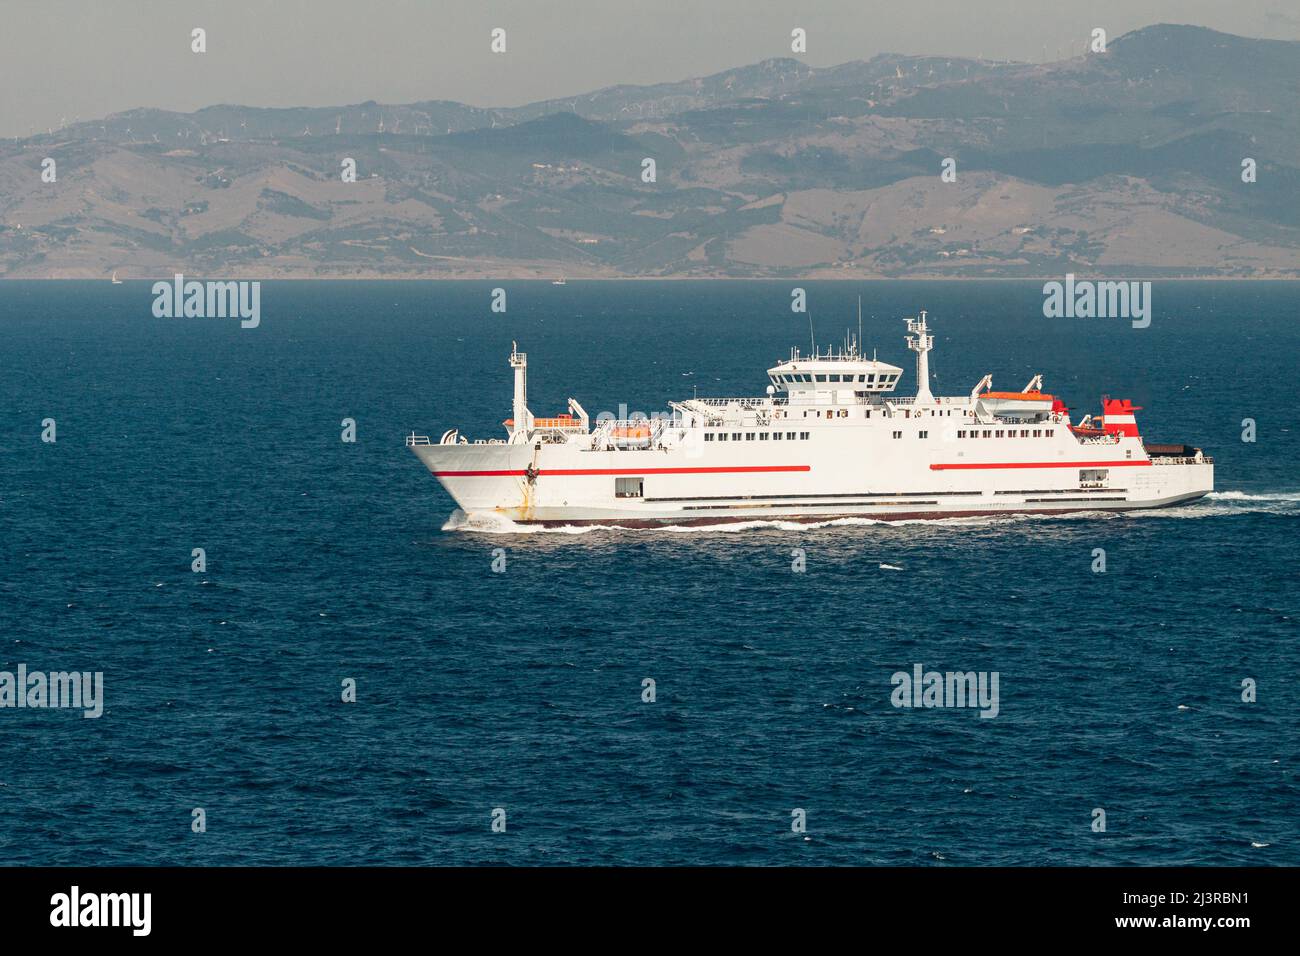 View of a ship sailing in the sea. Stock Photo